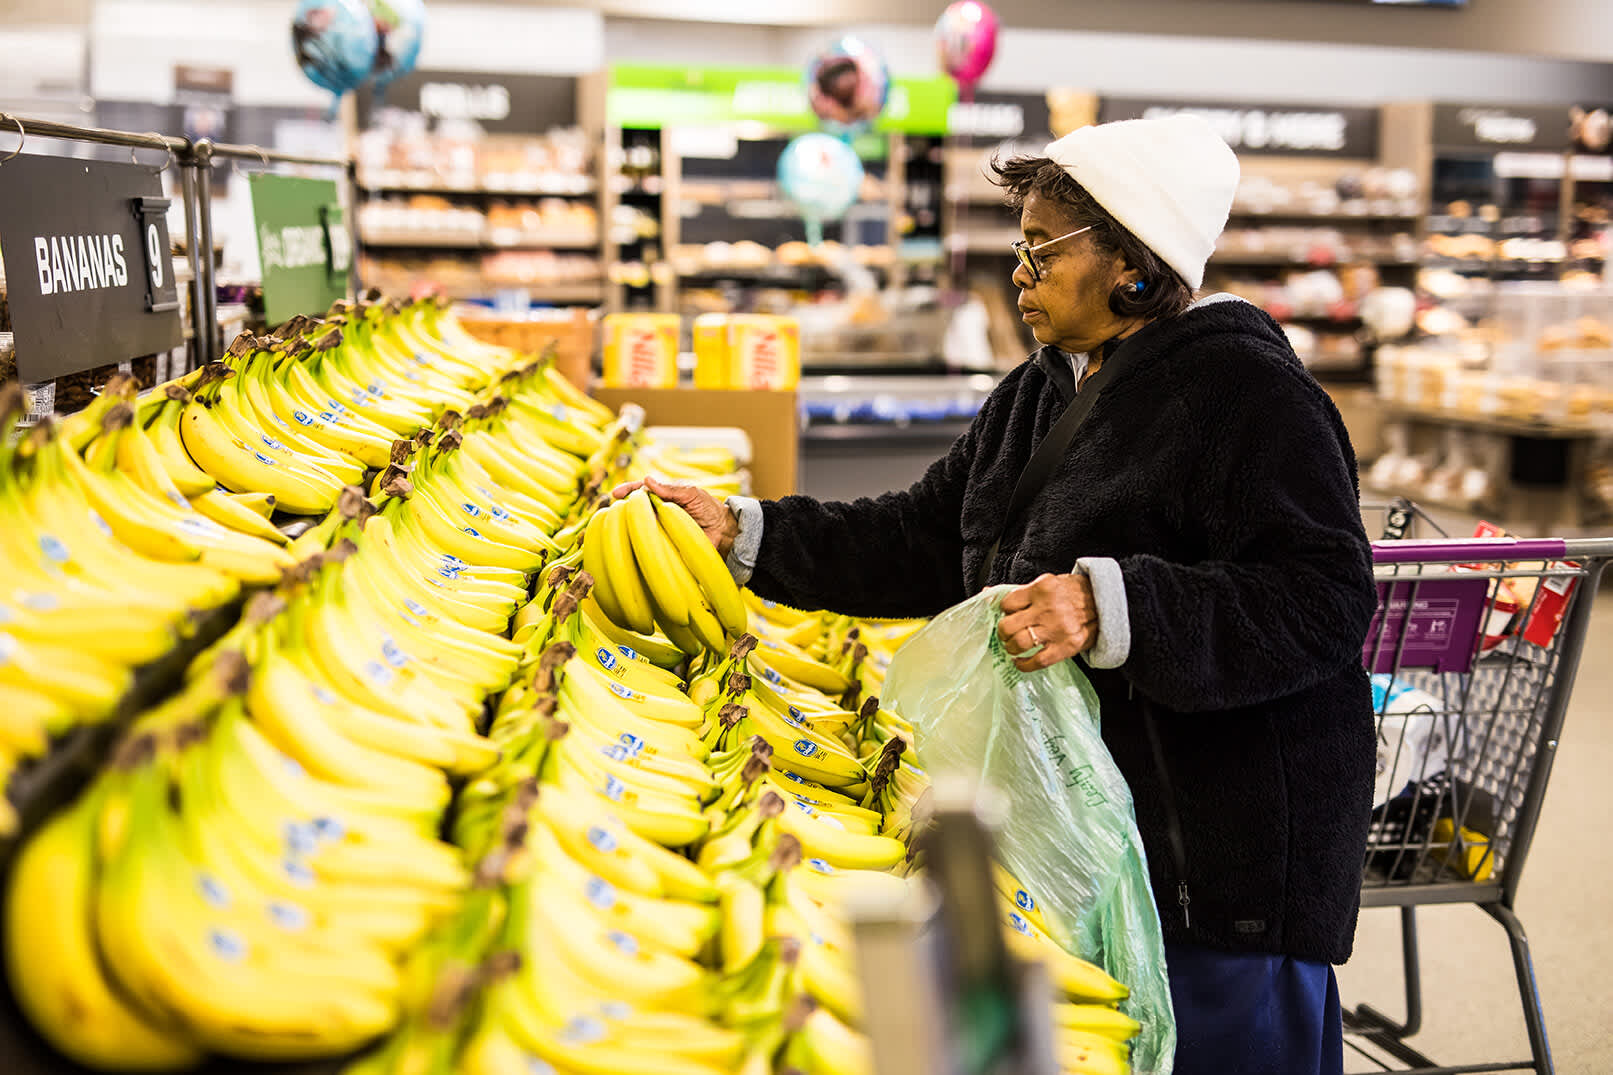 Florestine Jones at Ward 8’s only grocery store, Giant Food